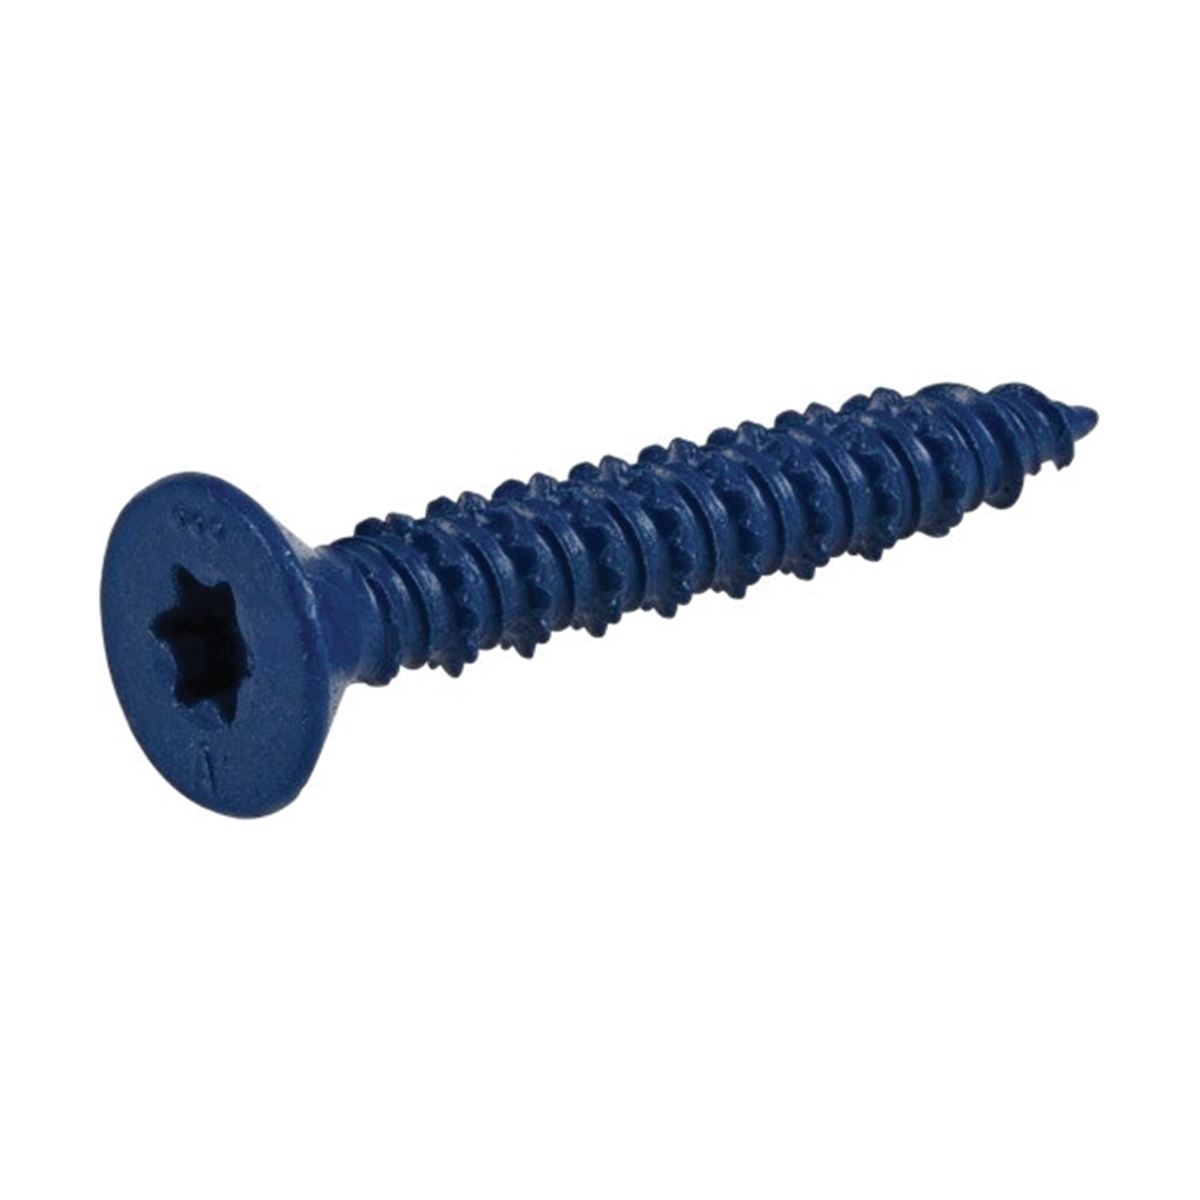 376531 Concrete Screw Anchor, 1/4 in Dia, 1-3/4 in L, Carbon Steel, Epoxy-Coated, 100/PK